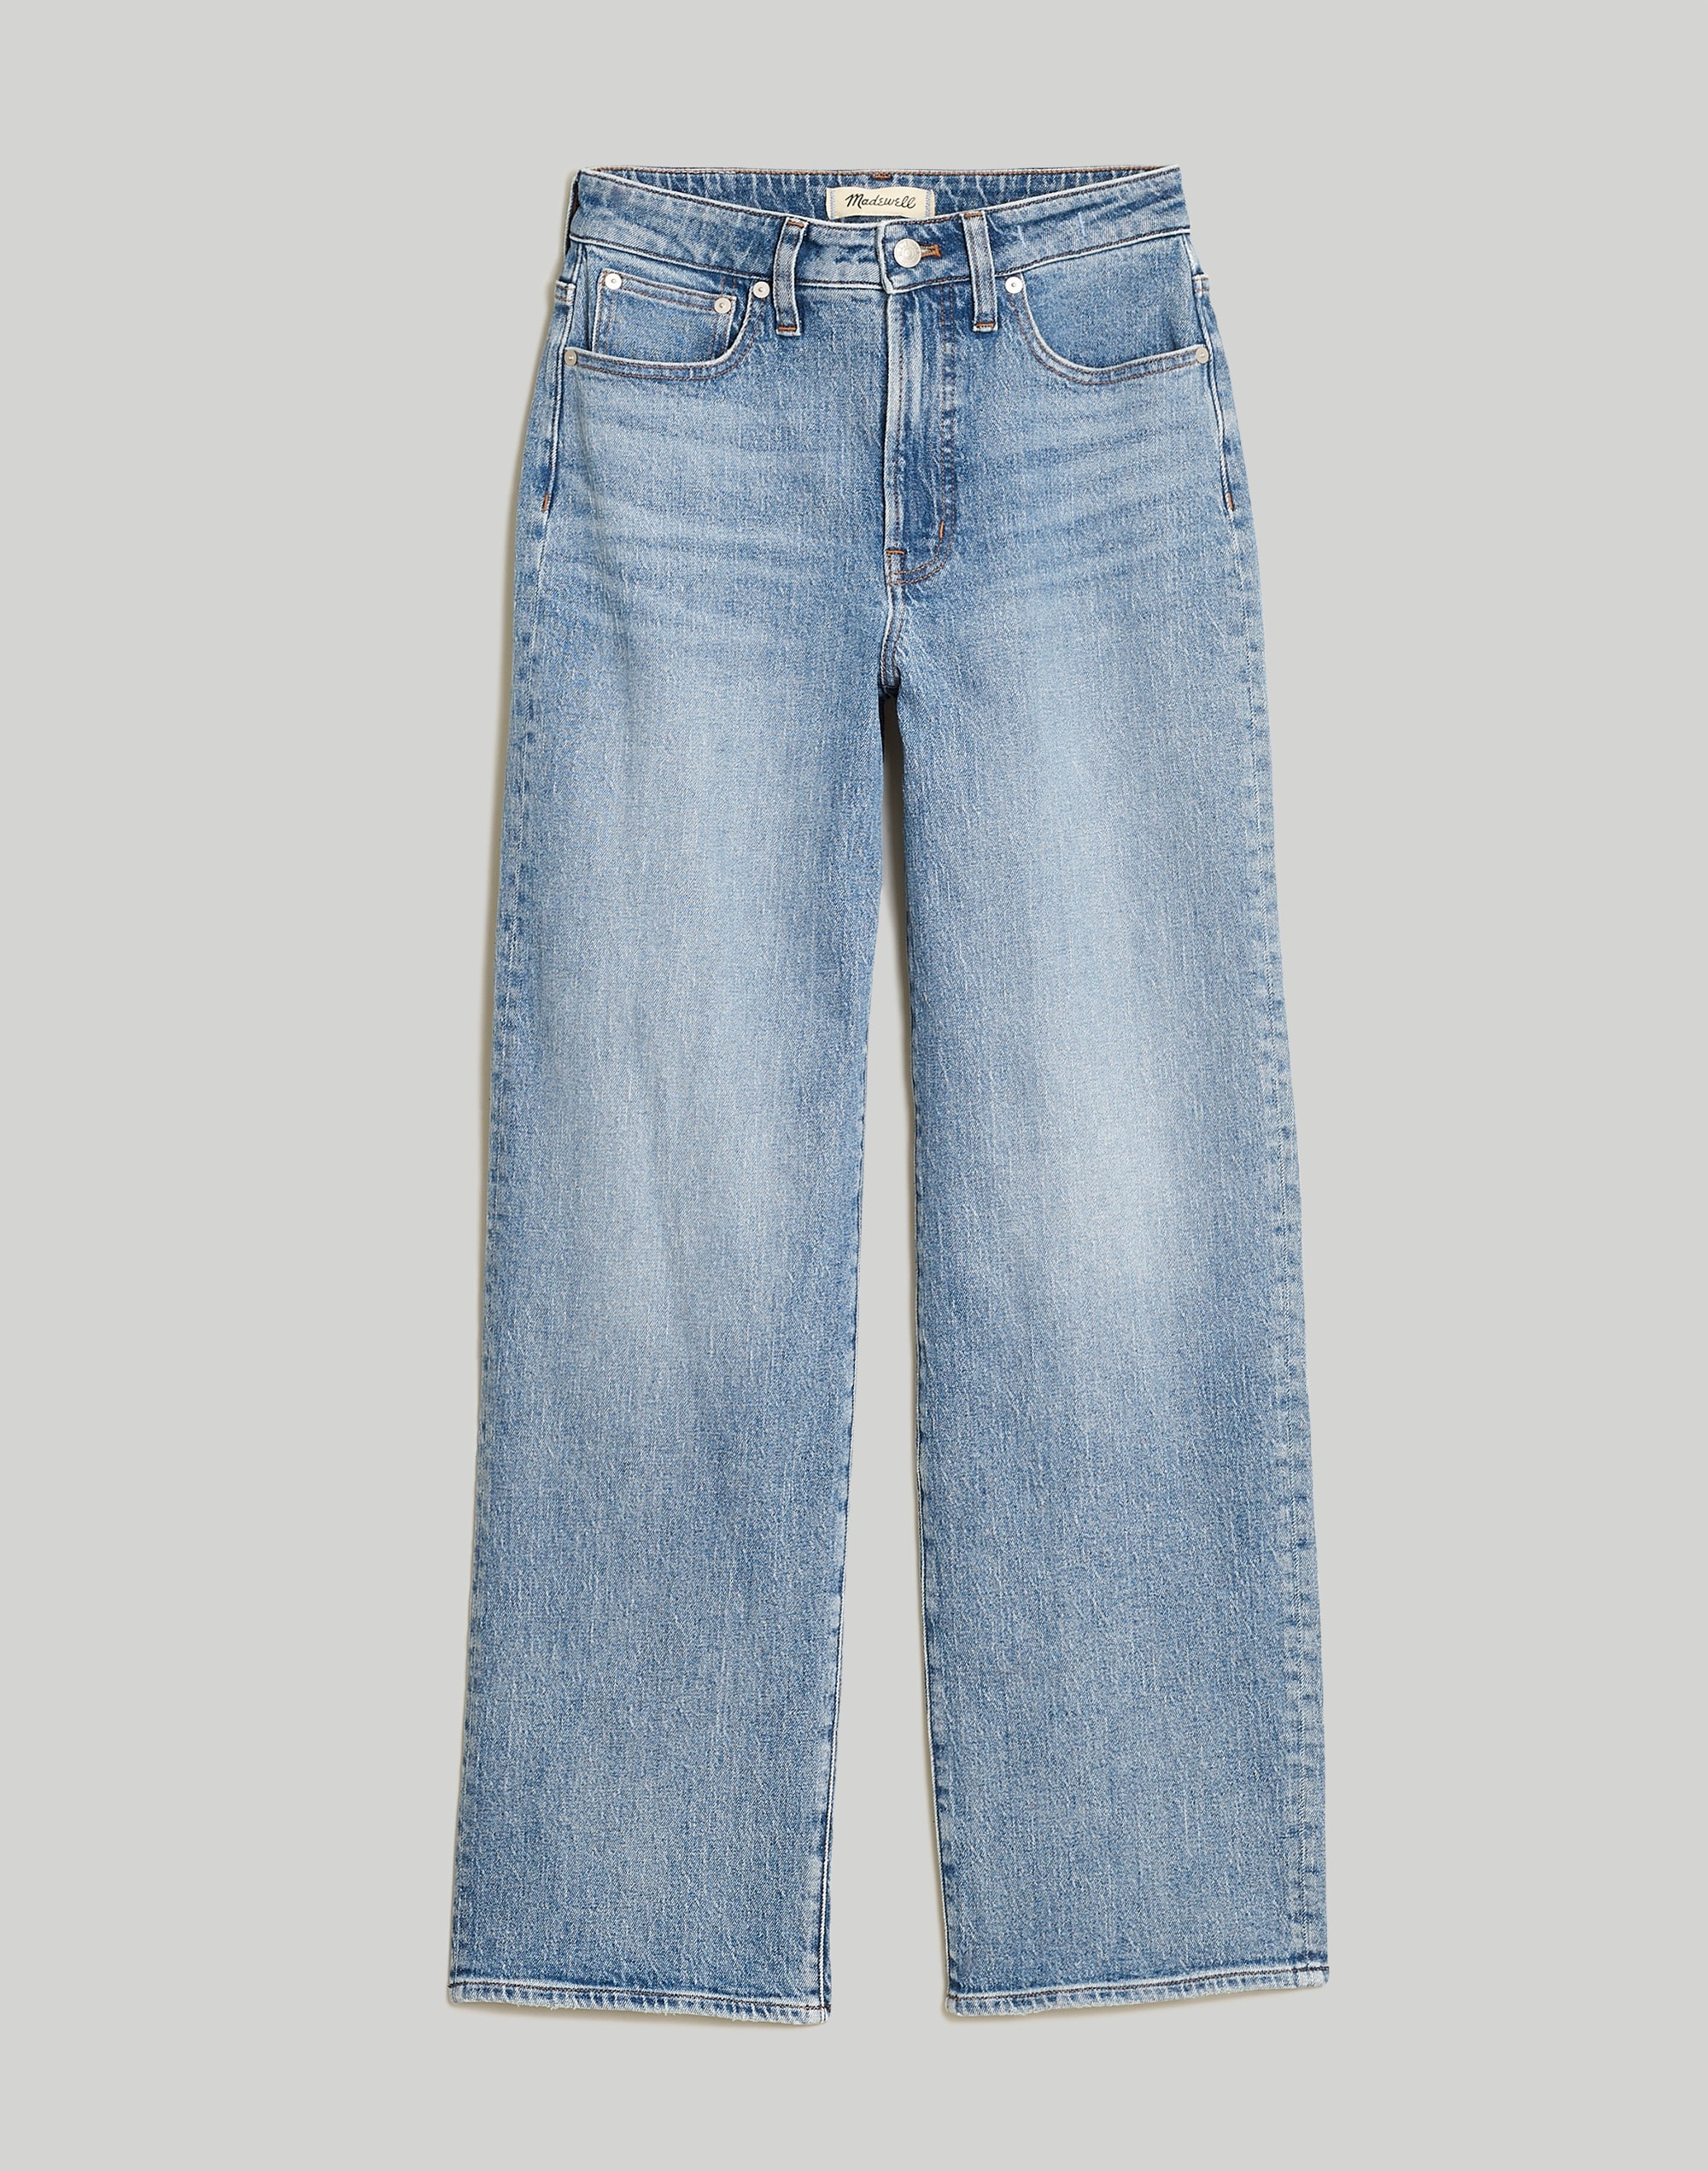 The Curvy Perfect Vintage Wide-Leg Jean